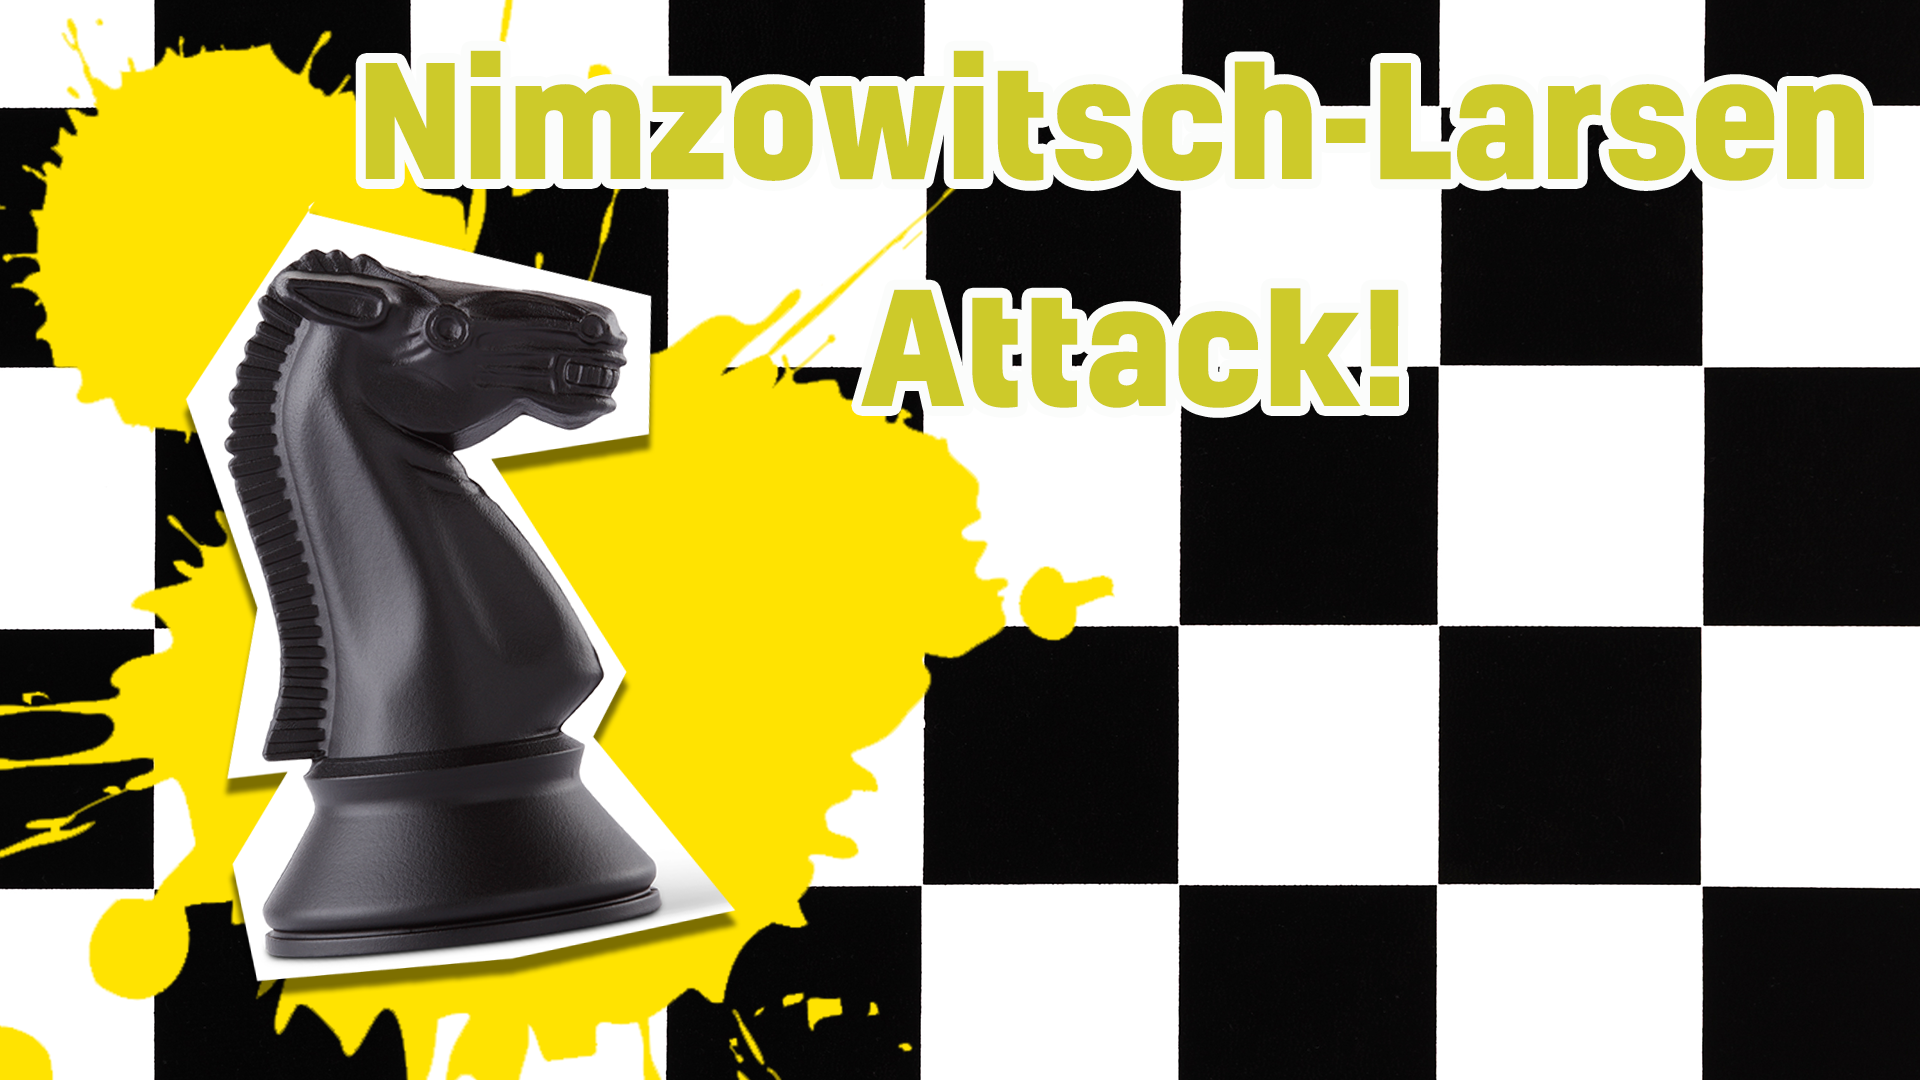 Yup, you've gone for a classic  -  the Nimzowitsch-Larsen attack! This means you're gonna play your bishop's pawn early so you can get your bishop out there and on the board!